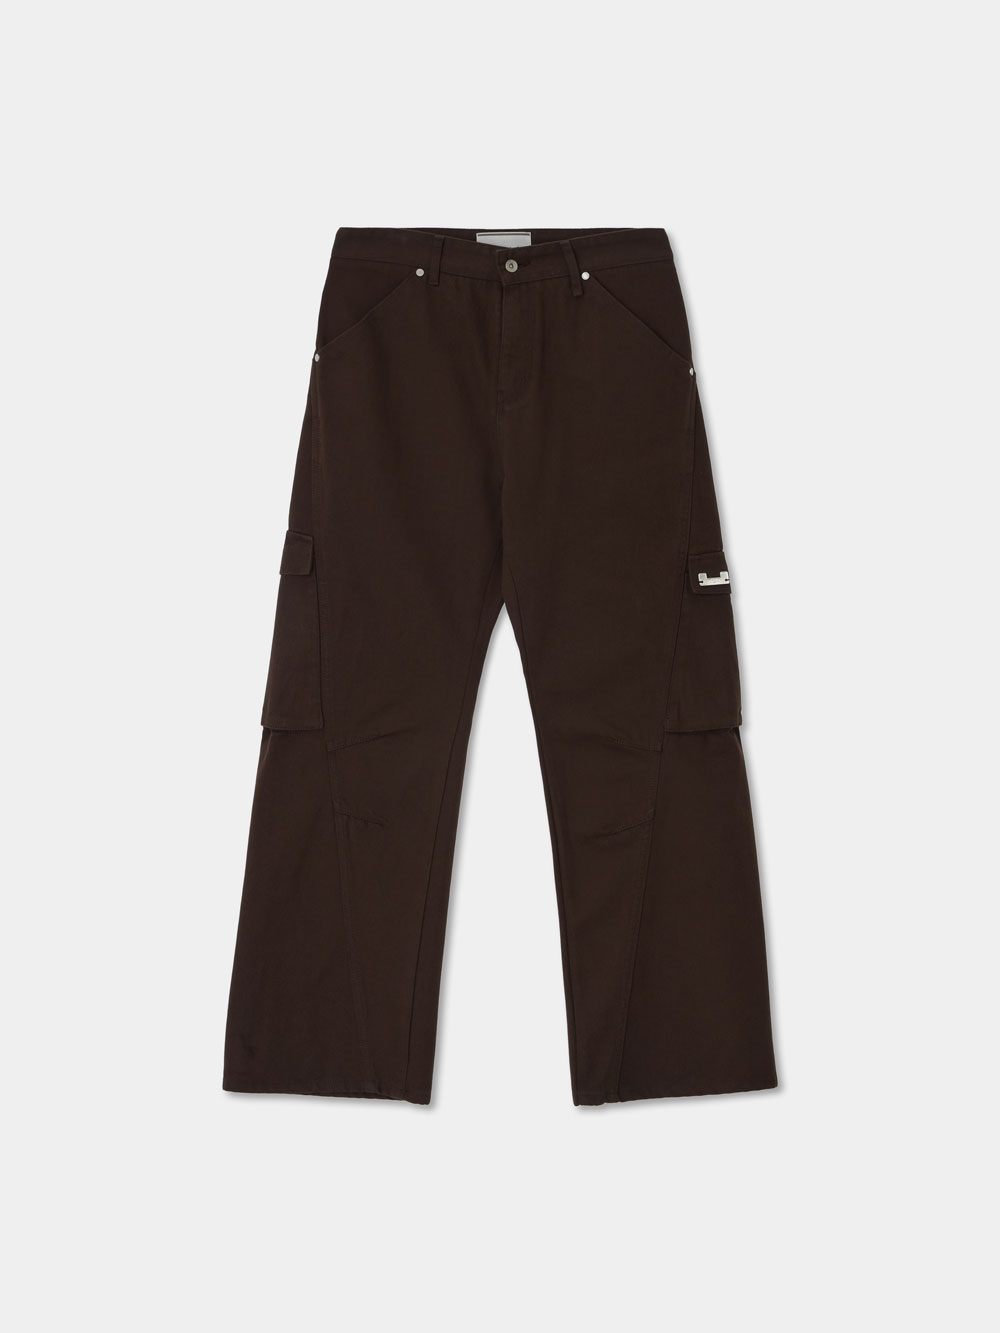 Wave Cutting Cargo Cotton Pants_Brown